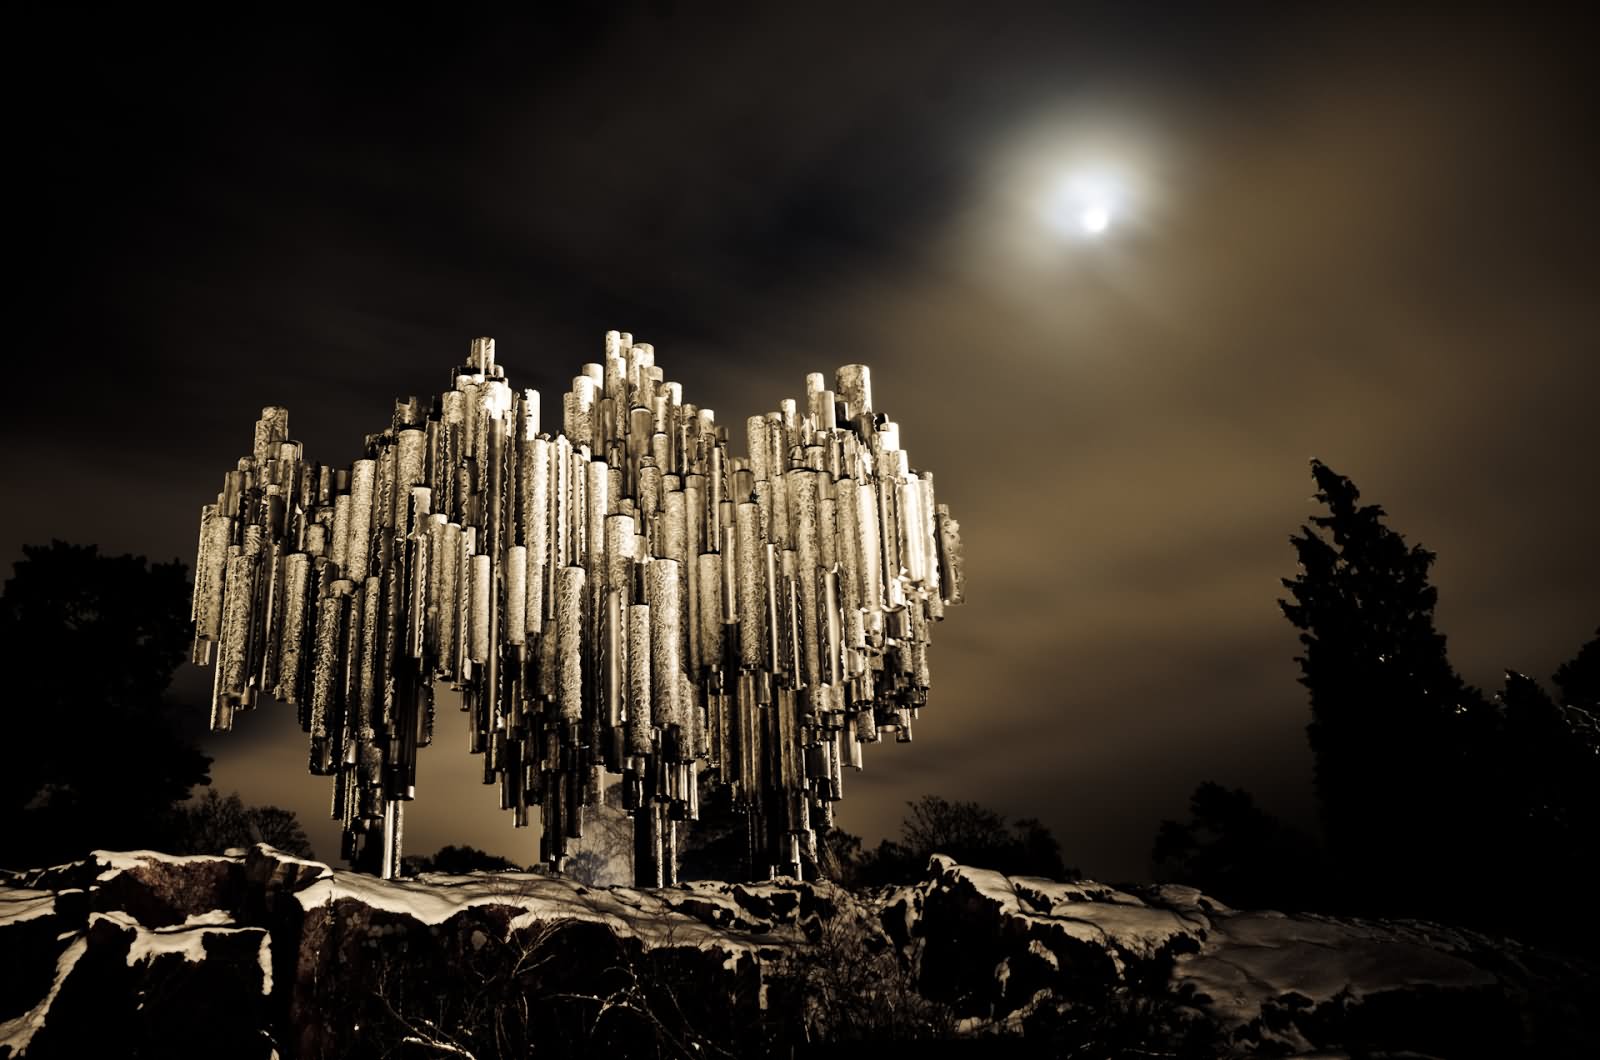 Sibelius Monument With Moon At Night